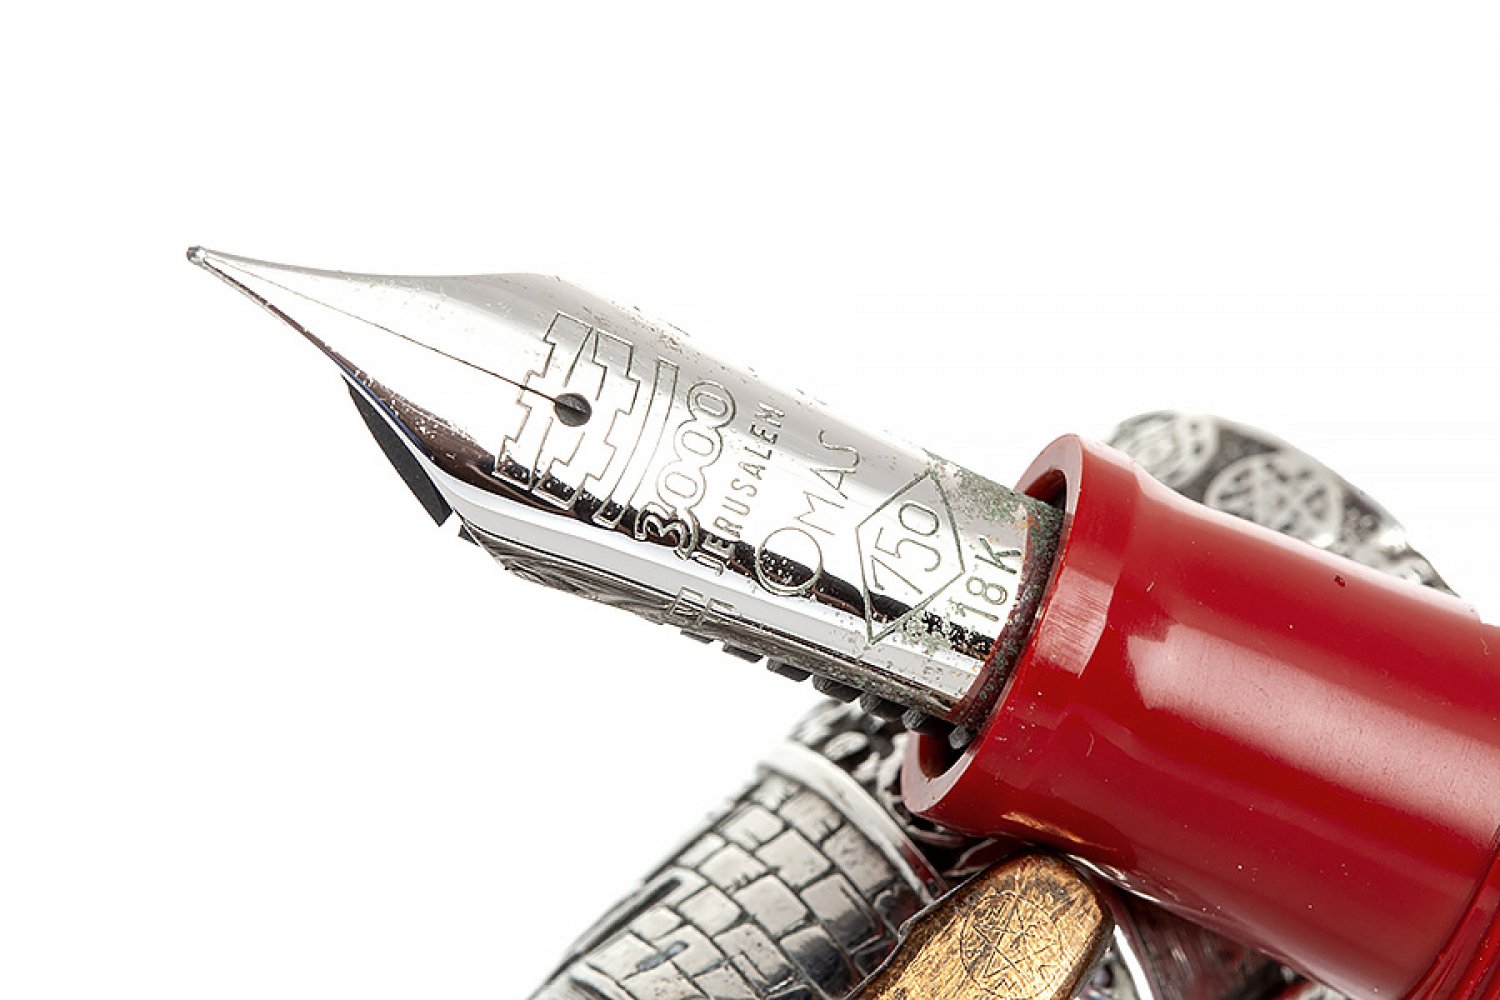 OMAS "JESURALEM 3000" FOUNTAIN PEN.Coral resin and silver barrel.Limited edition. Exemplary 0973.Nib - Image 2 of 3